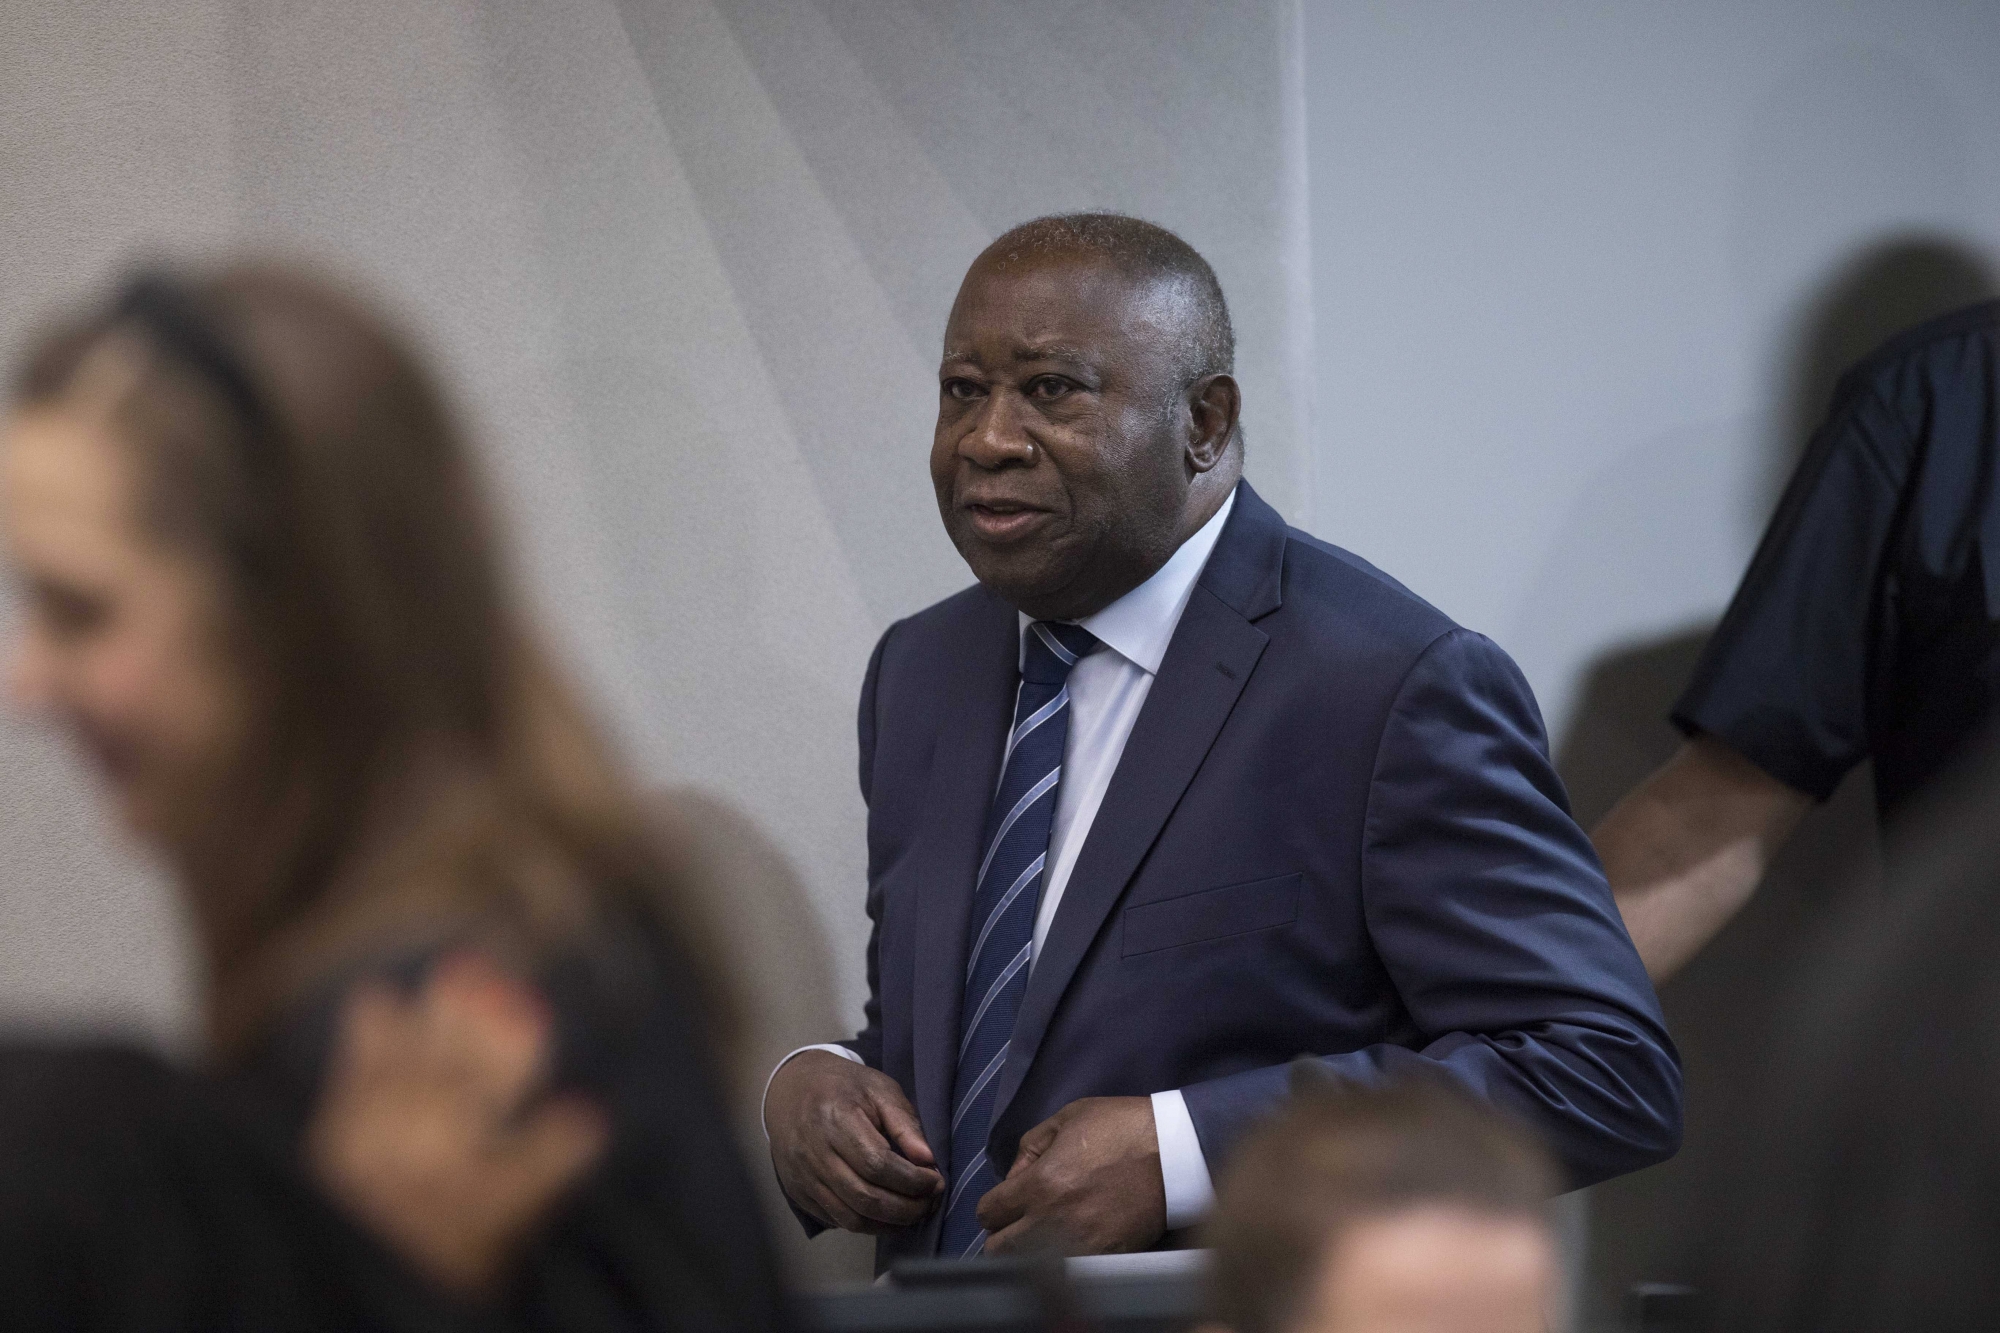 epa07285853 Former Ivory Coast President Laurent Gbagbo enters the courtroom of the International Criminal Court  in The Hague, Netherlands, 15 January 2019, where judges were expected to issue rulings on requests by Gbagbo and ex-government minister Charles Ble Goude to have their prosecutions thrown out for lack of evidence.  EPA/PETER DEJONG / POOL NETHERLANDS TRIAL LAURENT GBAGBO AT ICCH